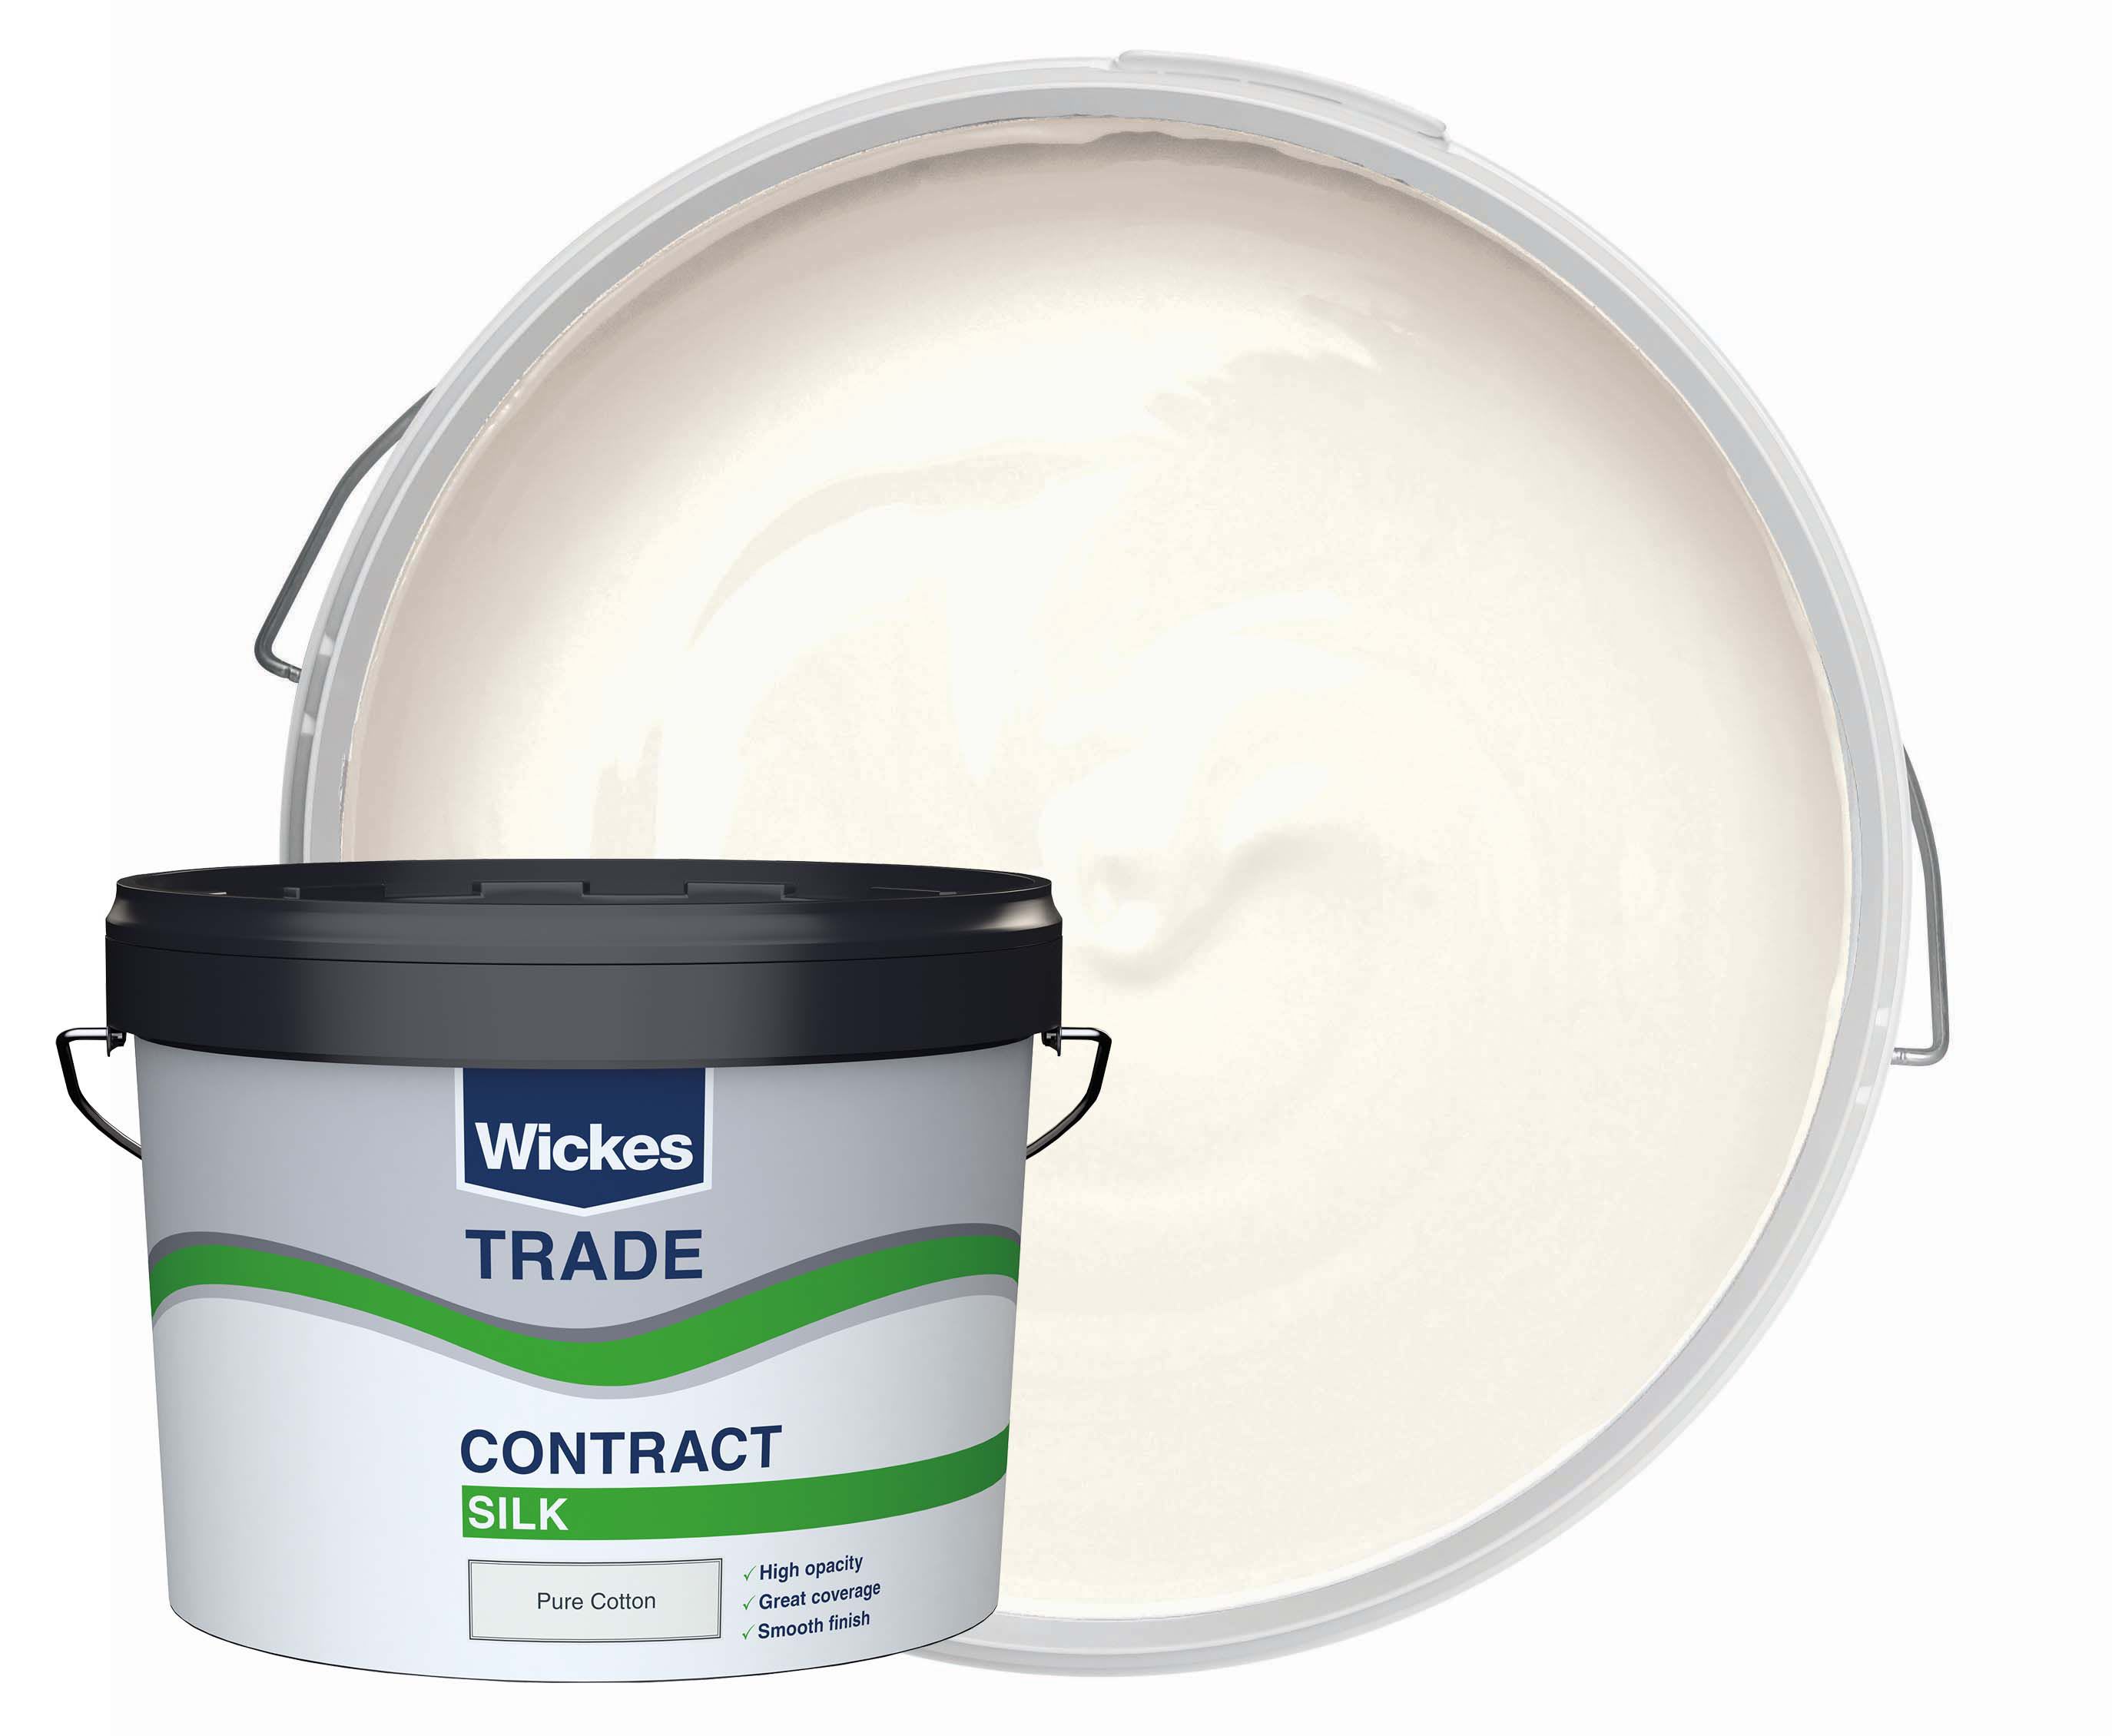 Wickes Trade Contract Silk Emulsion Paint - Pure